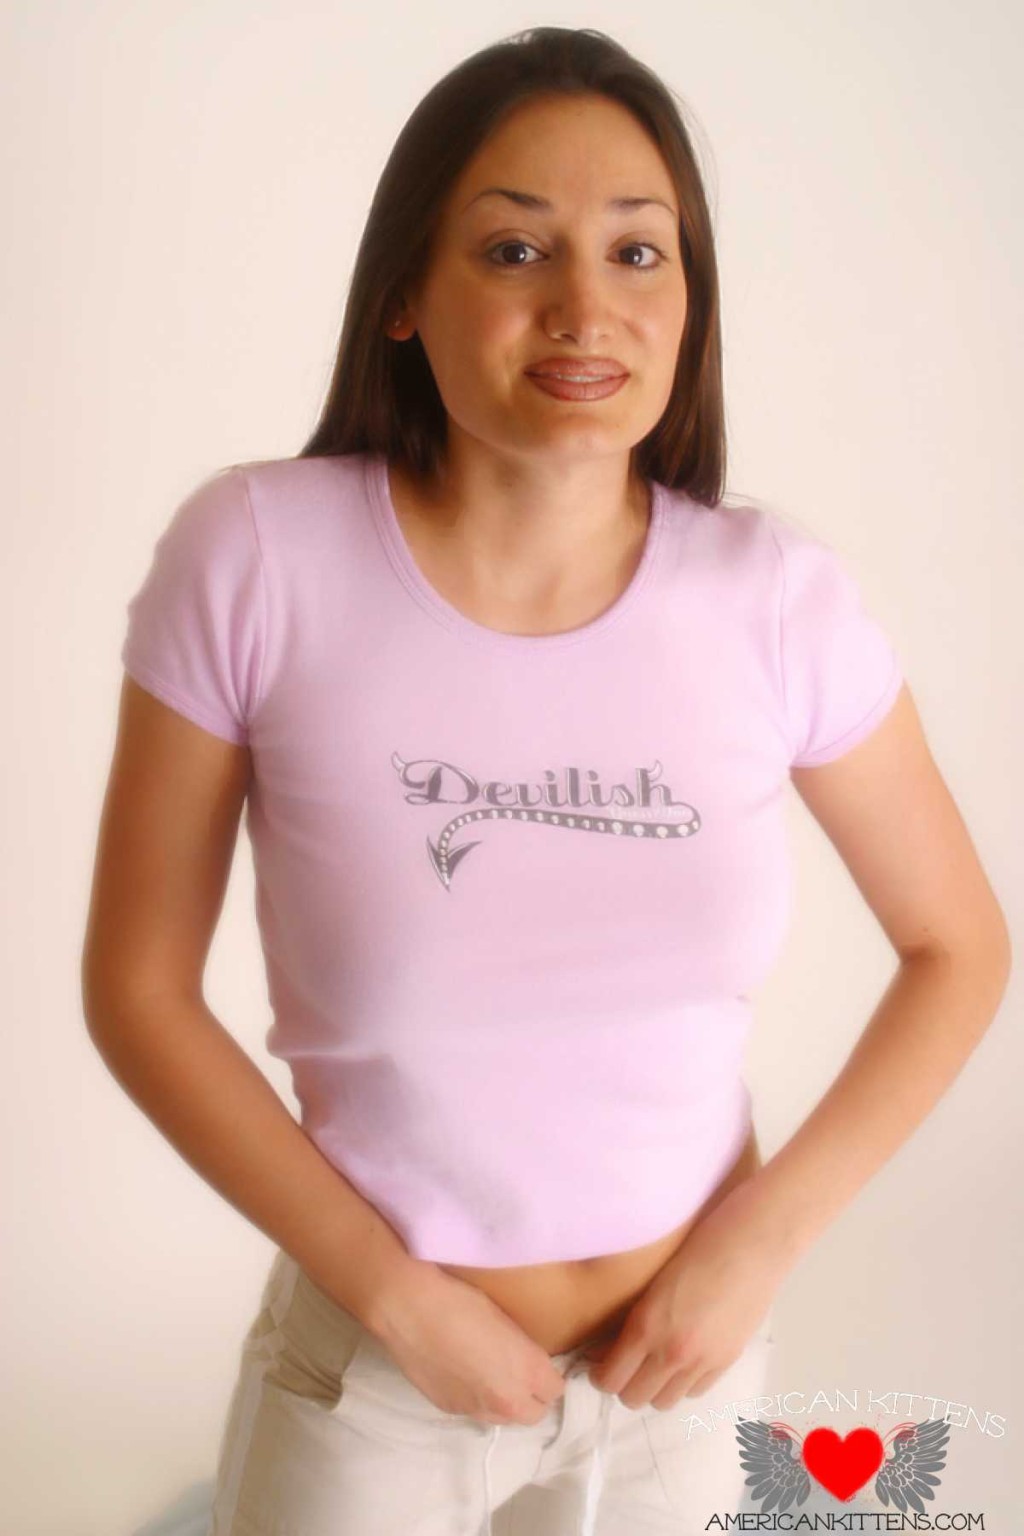 Emma devilish t shirt it's not just the shirt it's what's in it #77149697